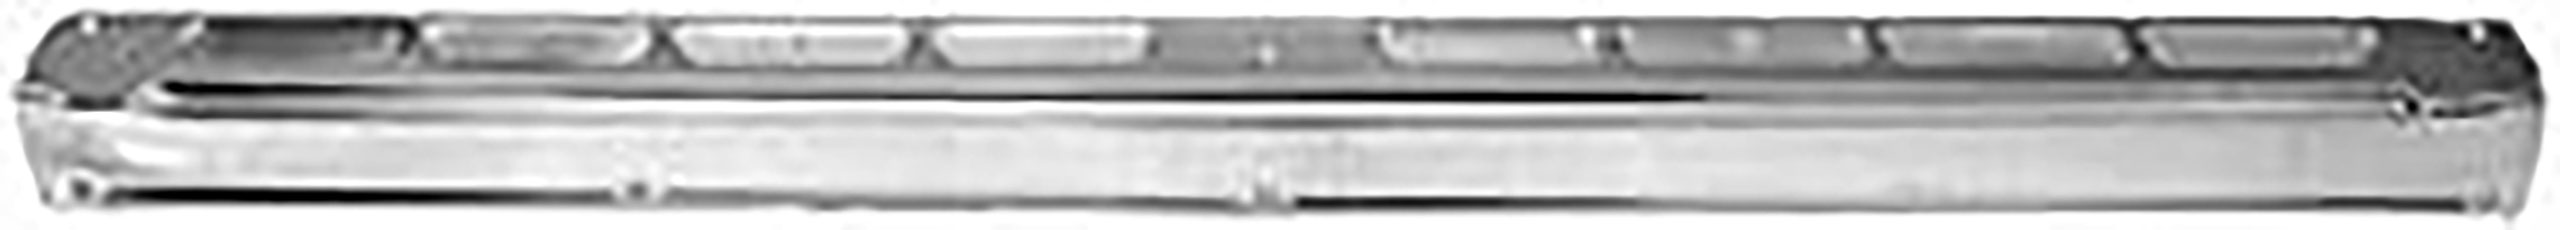 First Generation 1965-1968 Ford Mustang Coupe/Fastback Sill Plate - Aluminum - Dynacorn